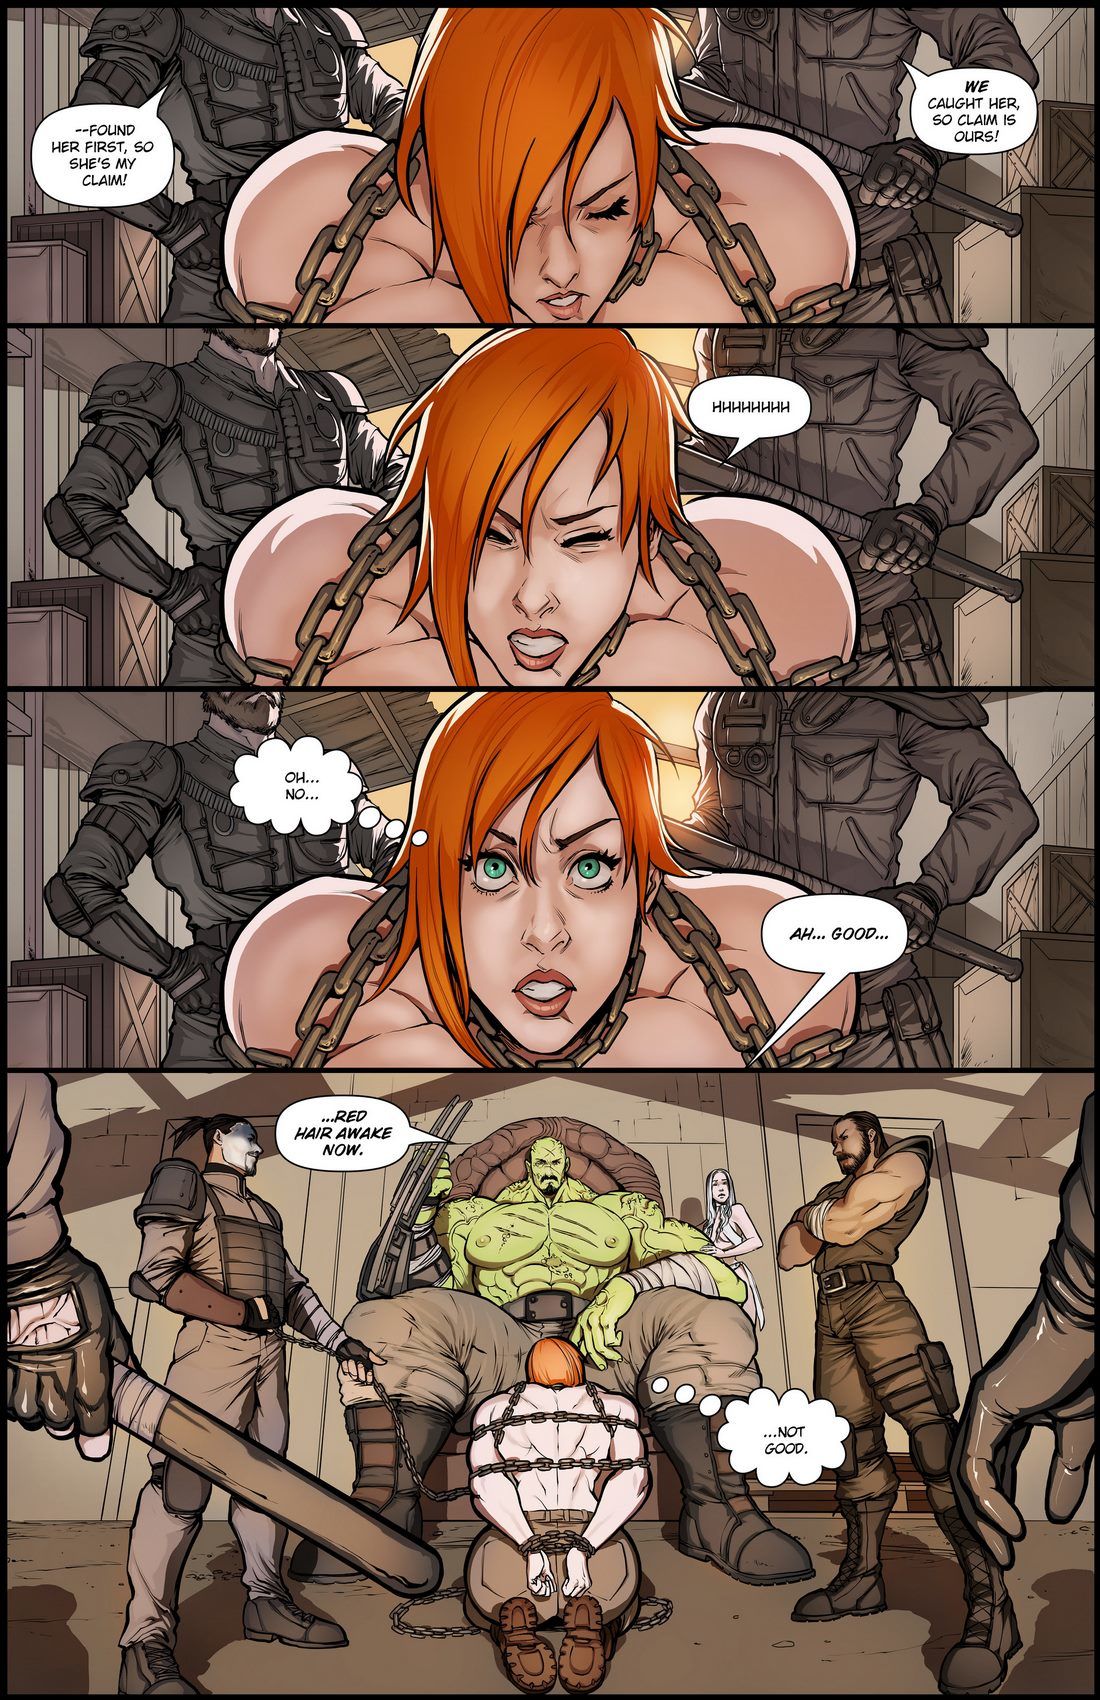 The Strong Shall Survive Issue 3 - MuscleFan page 3